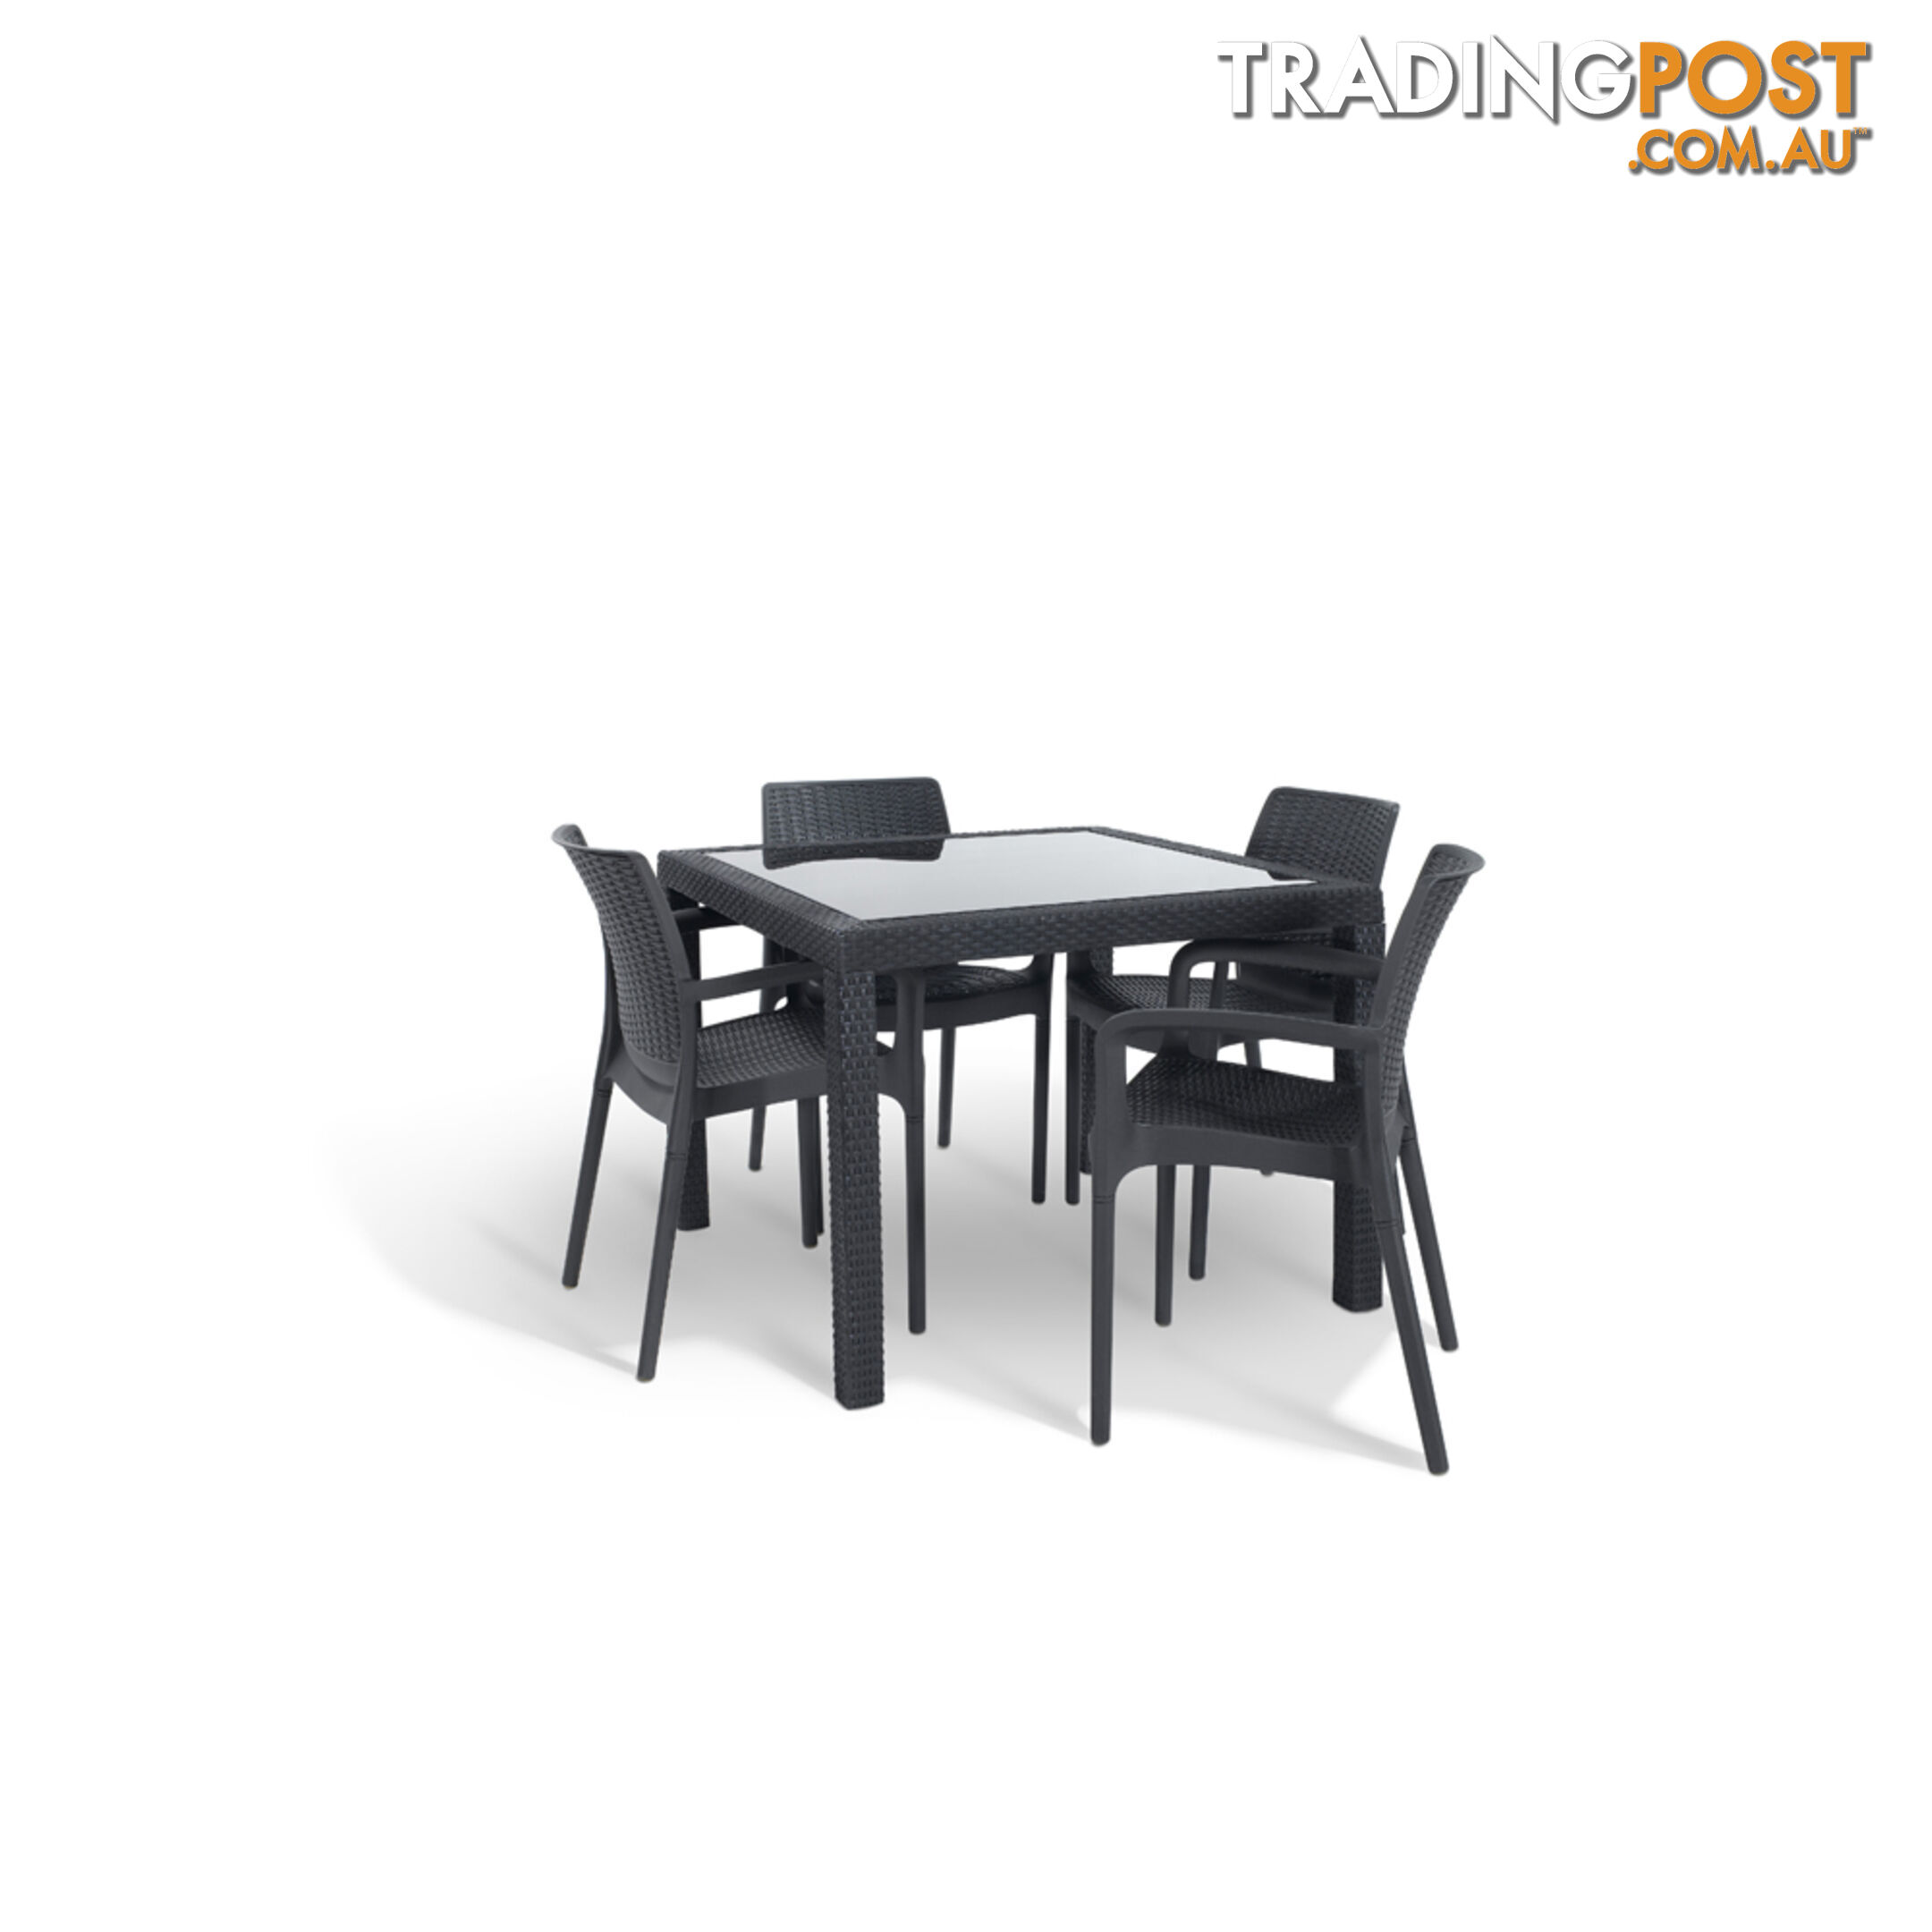 Keter Sumatra Table With 4 Bali Chairs Set